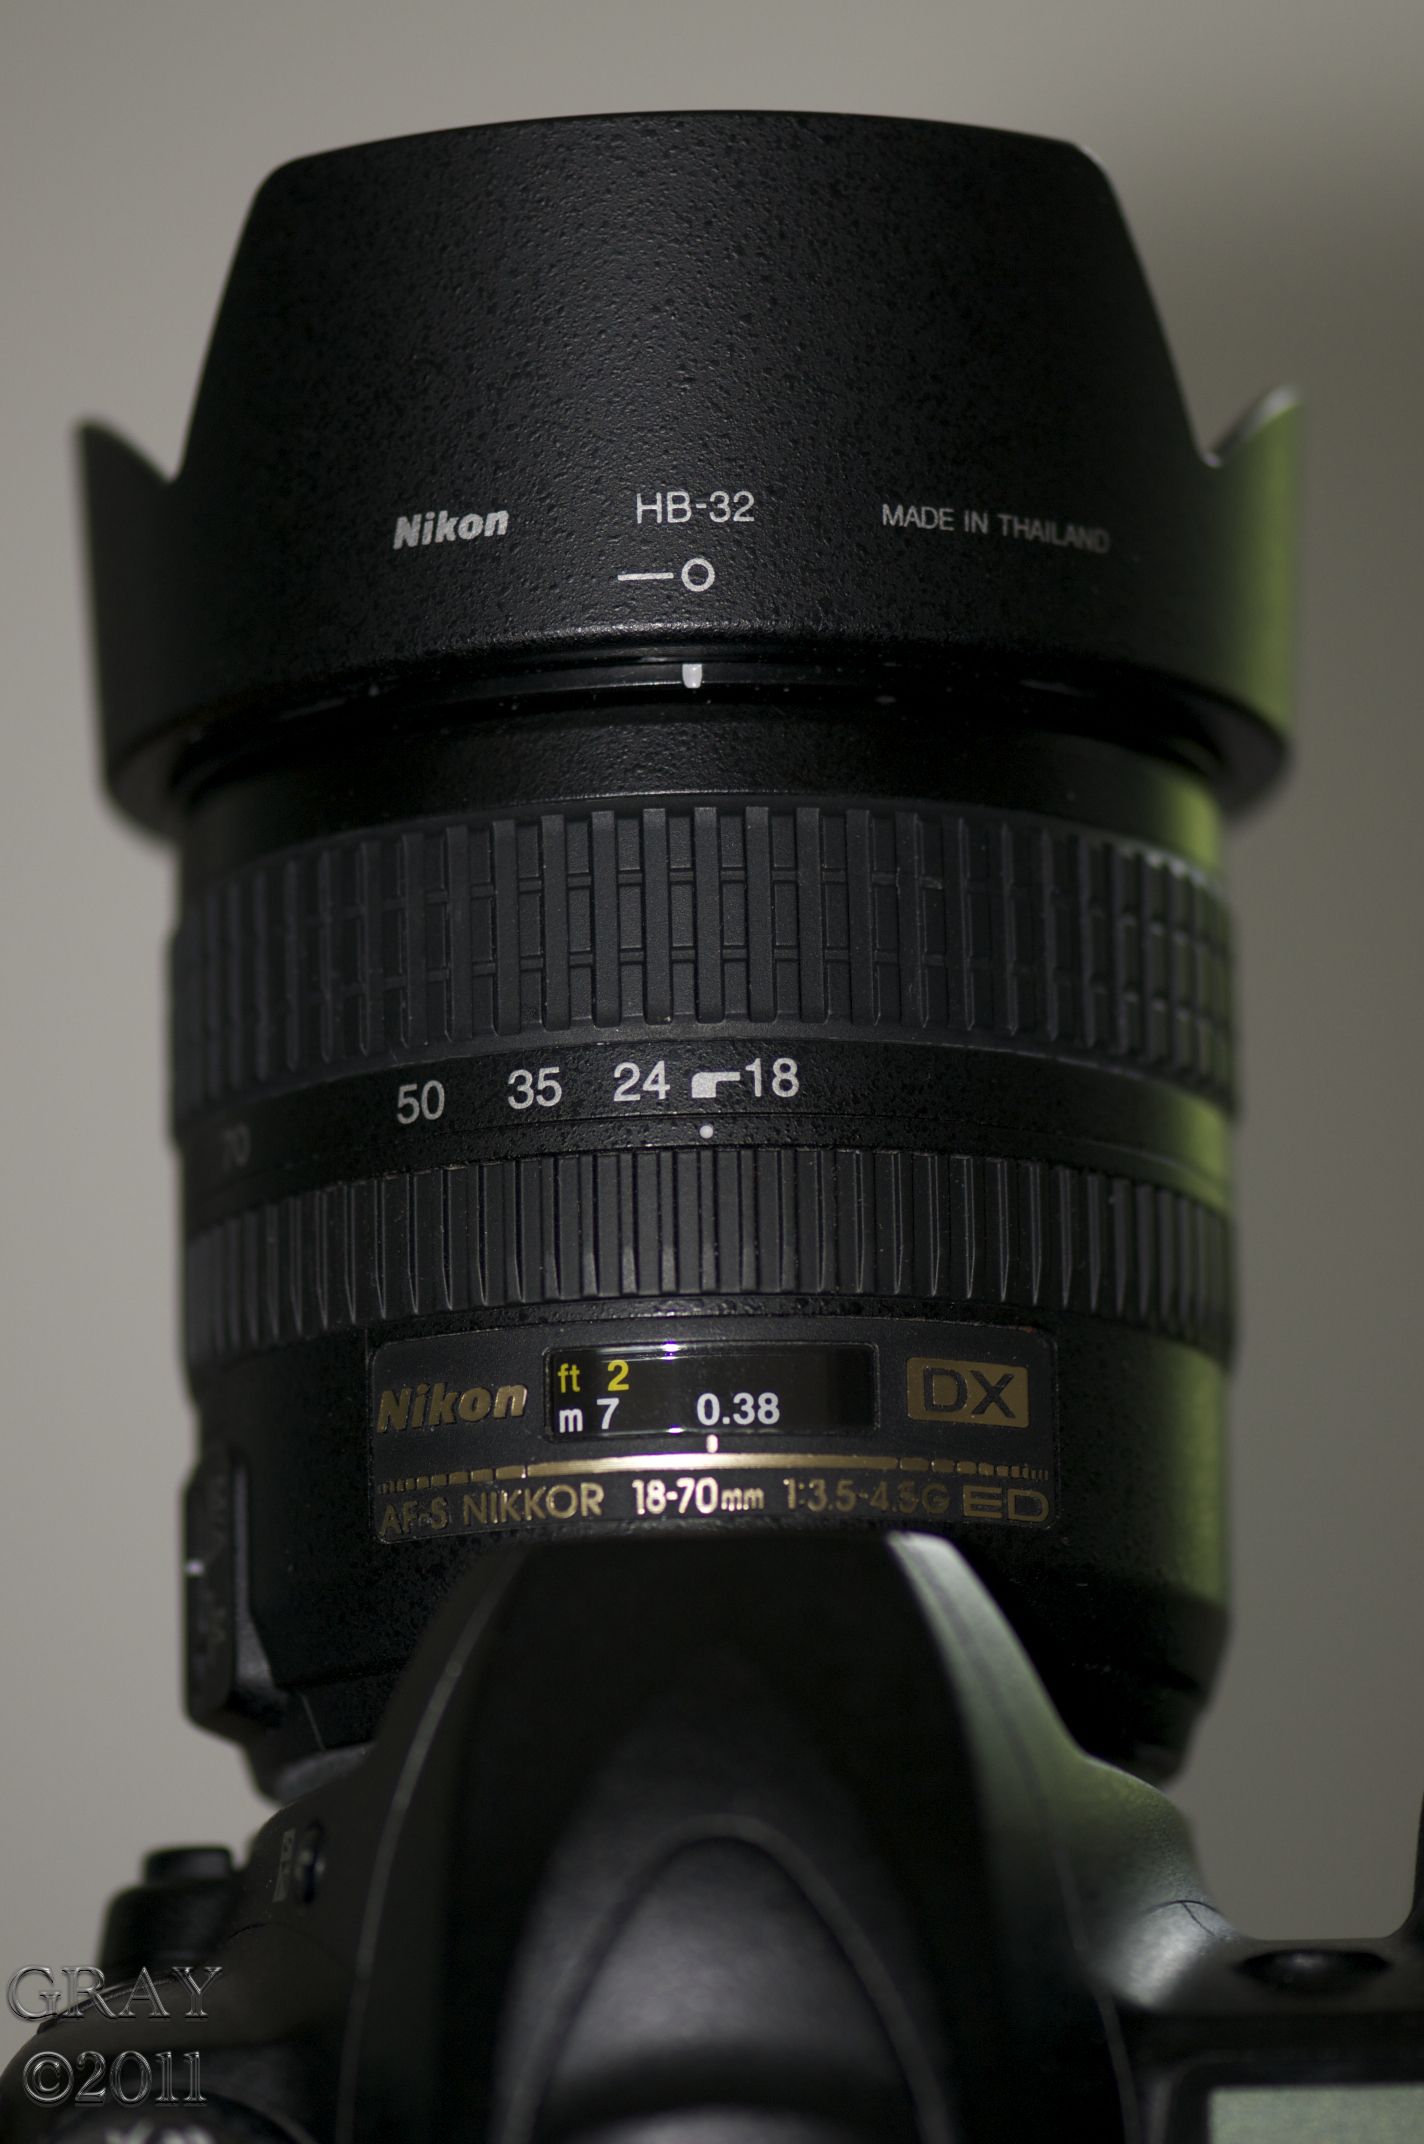 Nikkor 18-70mm f/3.5-4.5G Lens | Hours of Idleness-A